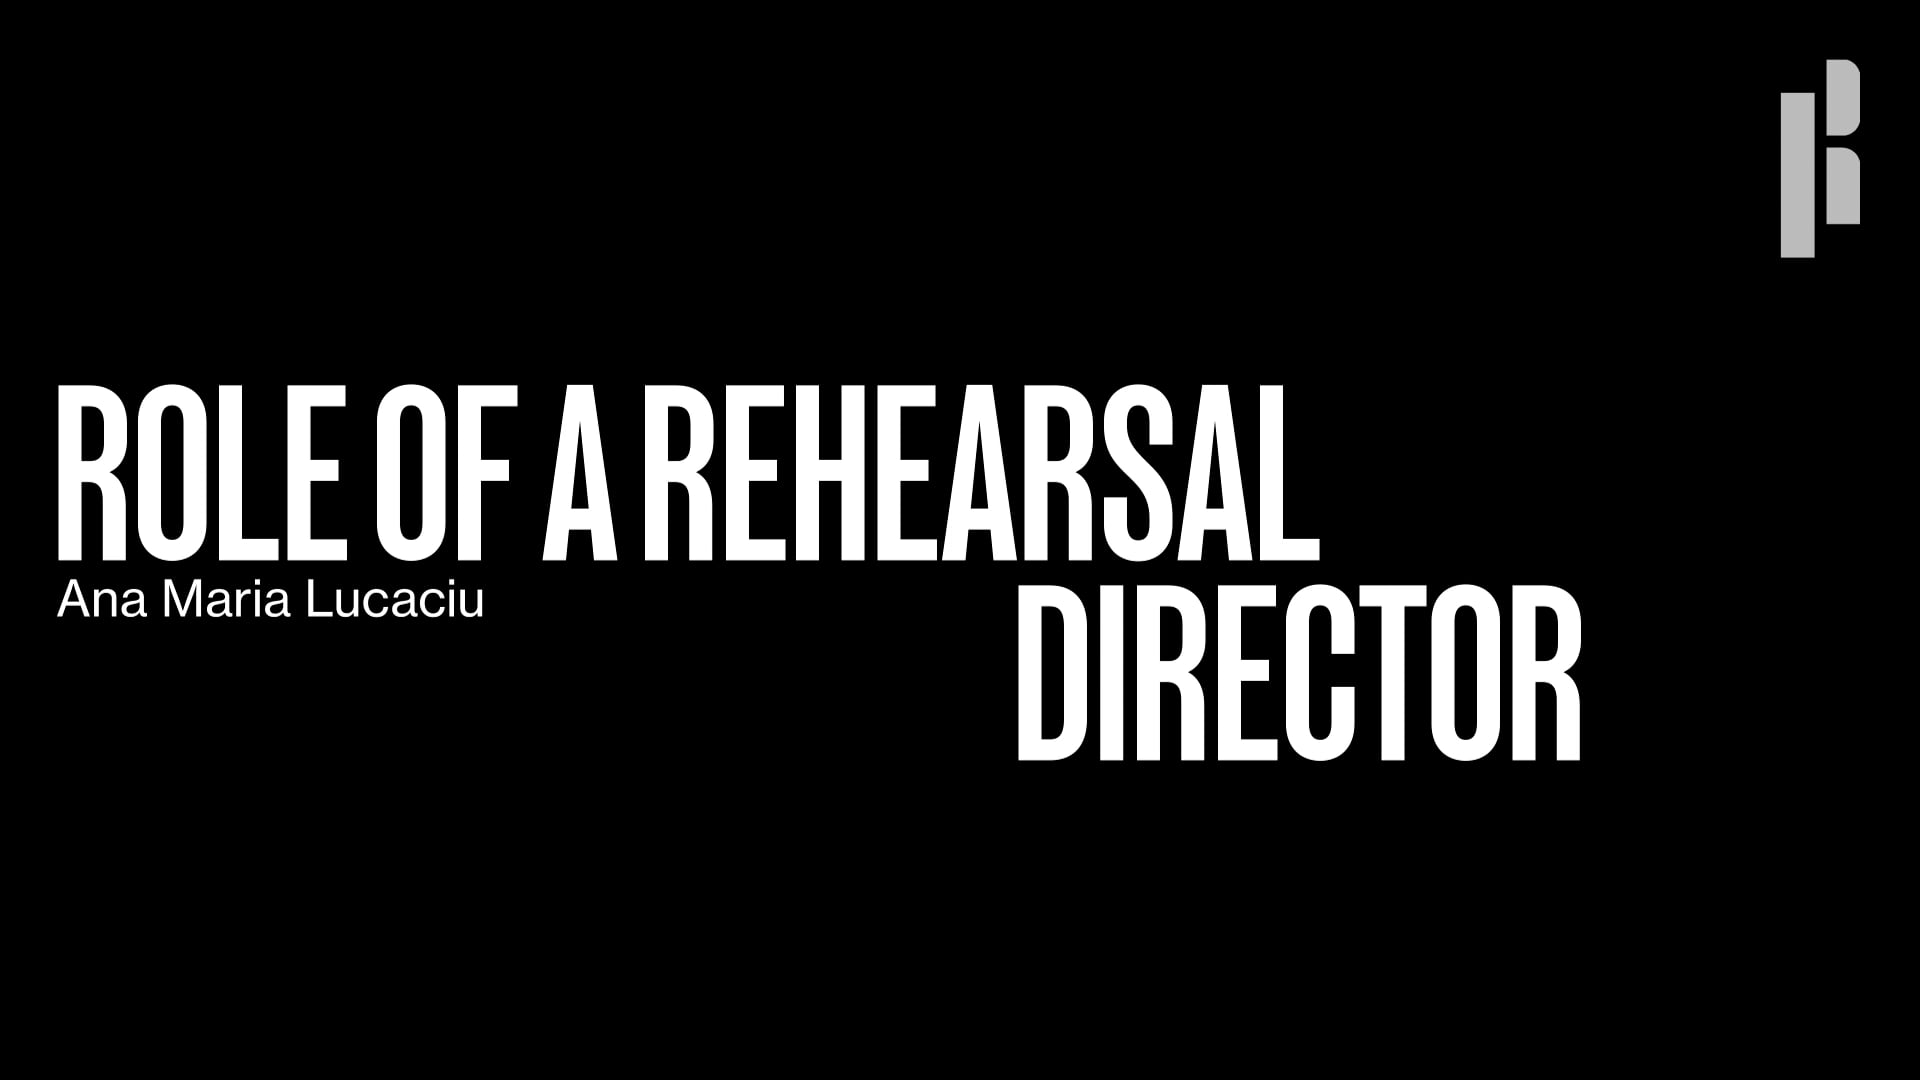 Role of a rehearsal director.